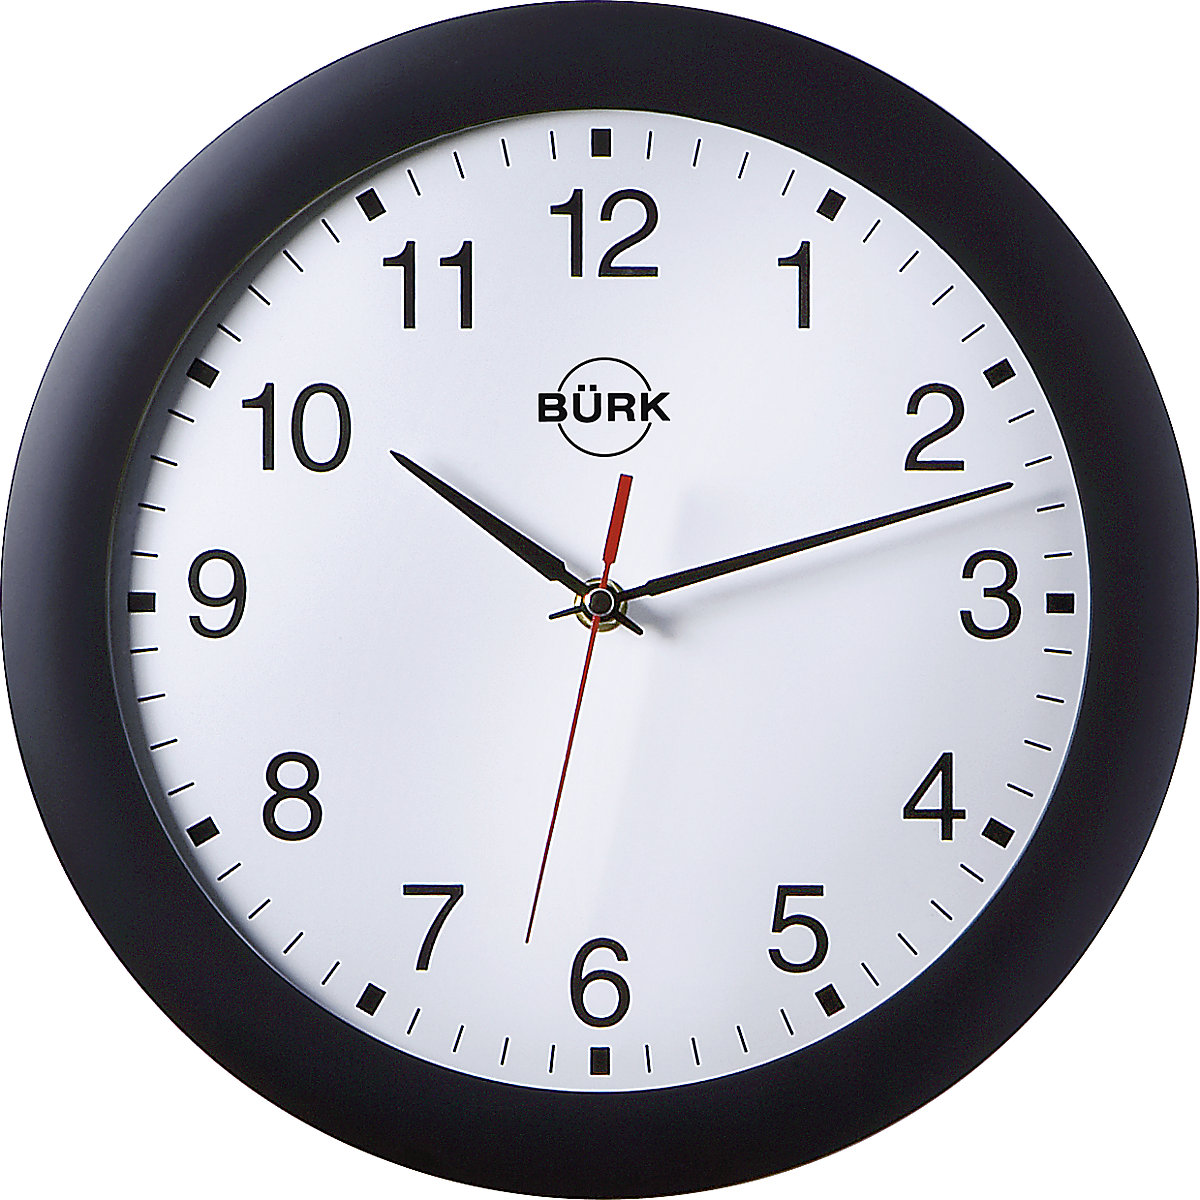 Wall clock made of ABS plastic, Ø 300 mm